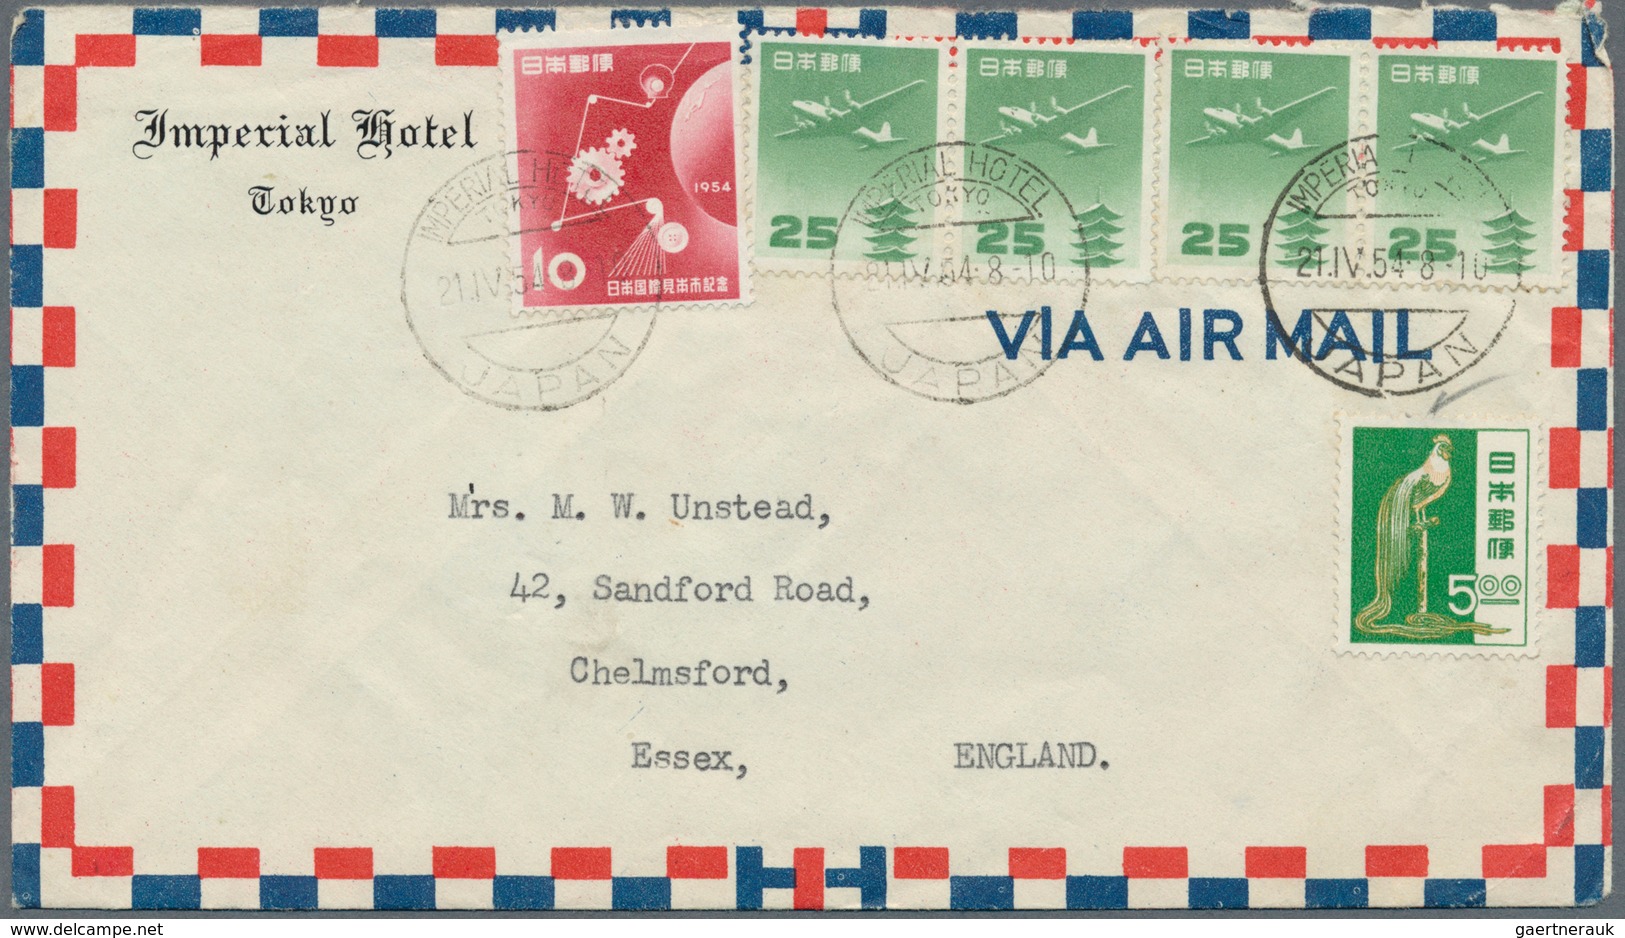 Japan: 1930/65, covers (28), used stationery/FDC (2) and on piece (2) with postmarks of Imperial Hot